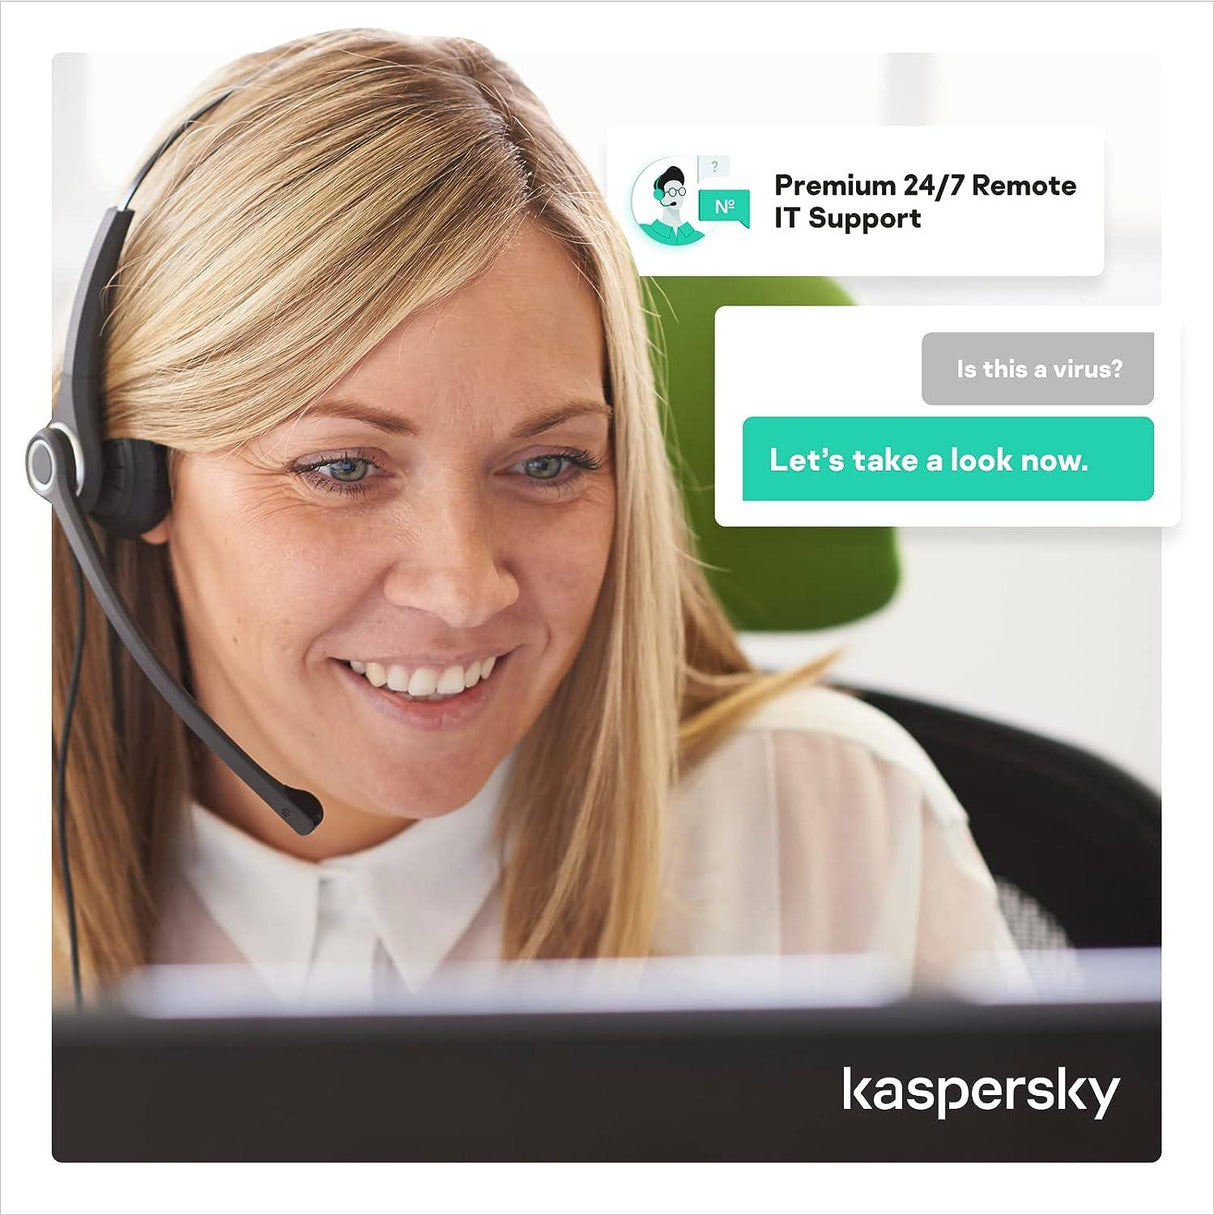 Kaspersky Premium 2023 - Instant Download for Windows and Mac (10 Computers) - SoftwareCW - Authorized Reseller